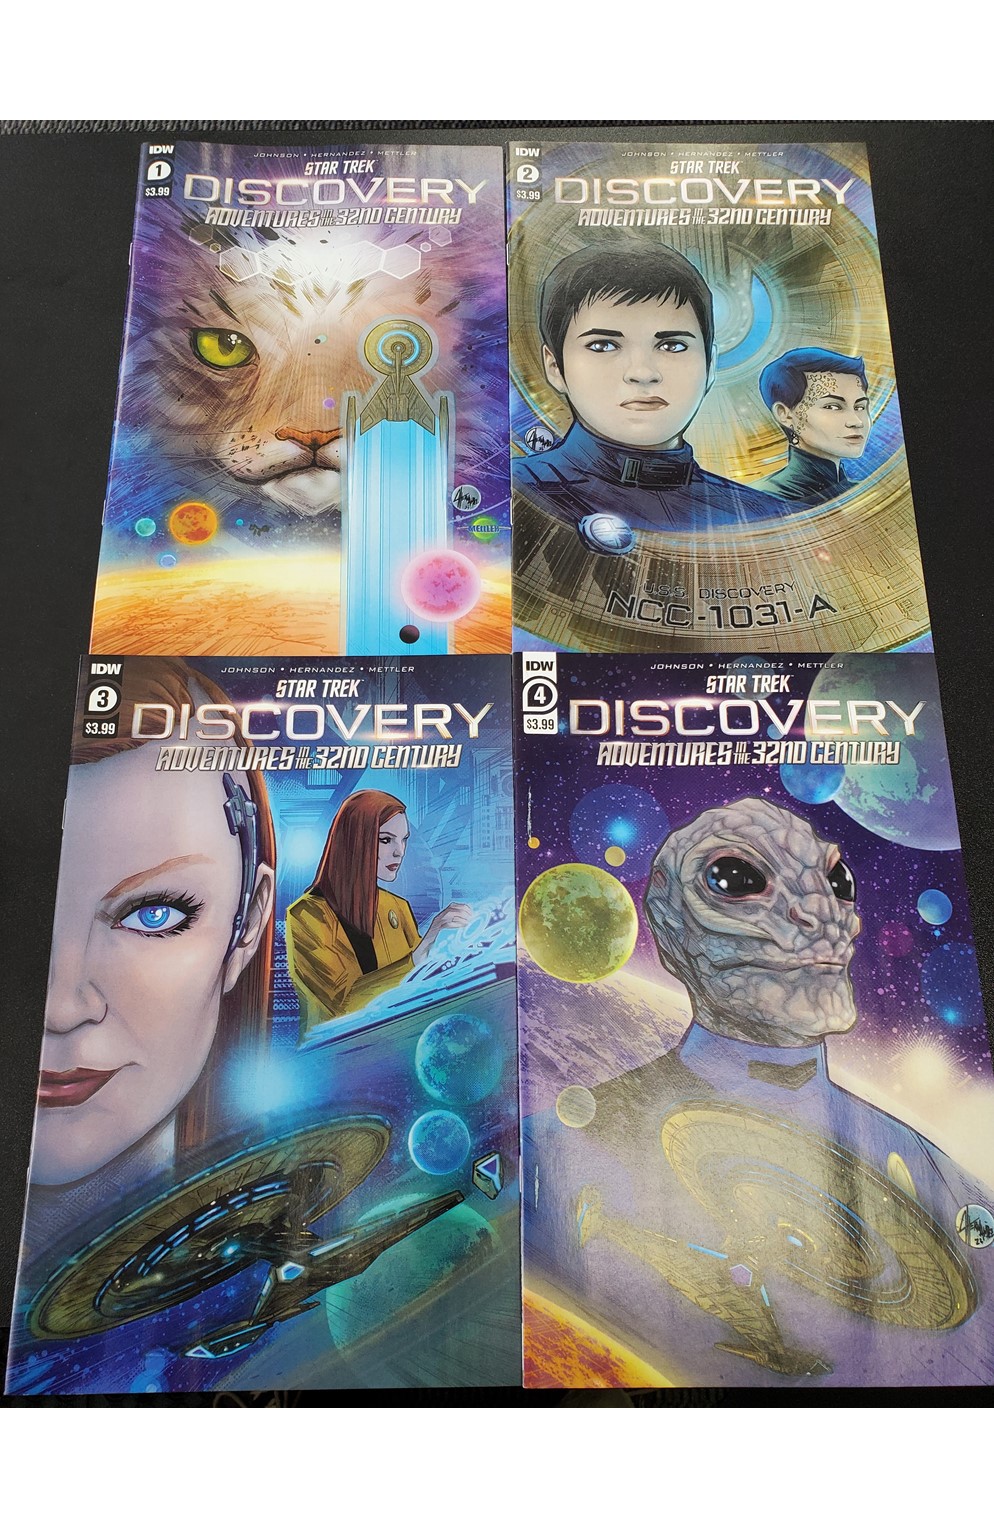 Star Trek Discovery Adventures In The 23rd Century #1-4 (Idw 2022) Set